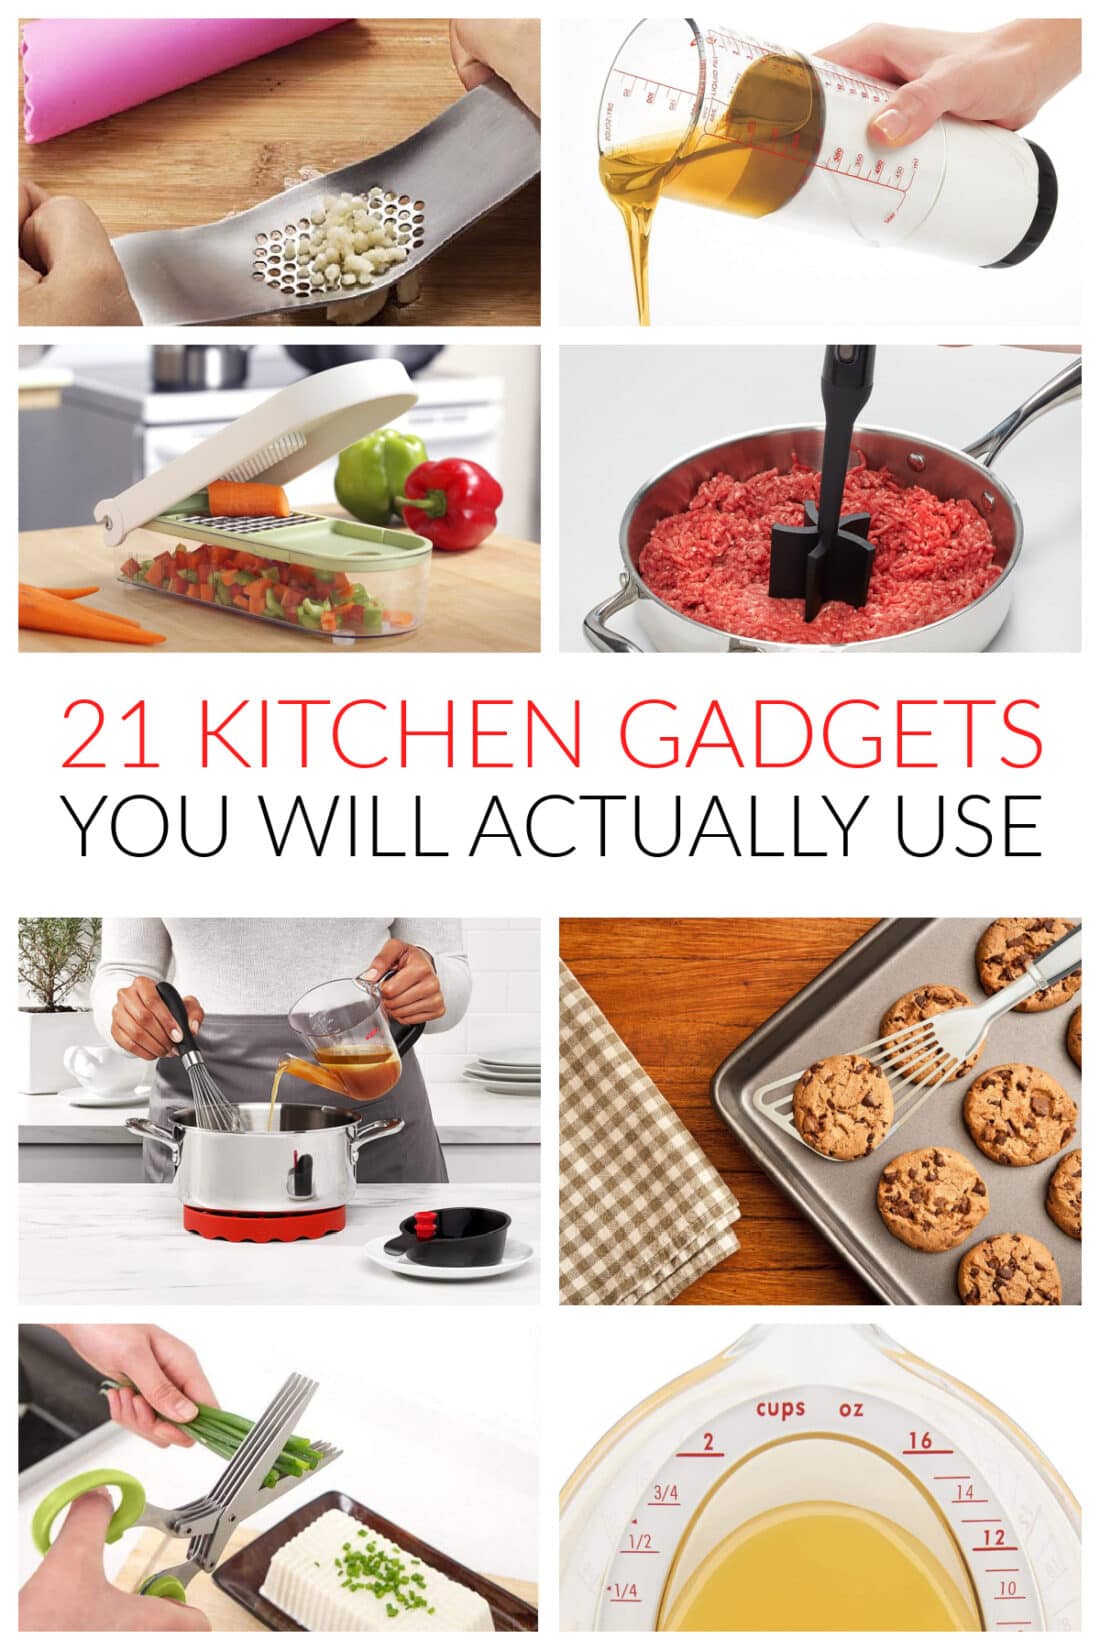 COLLAGE OF KITCHEN GADGET IMAGES